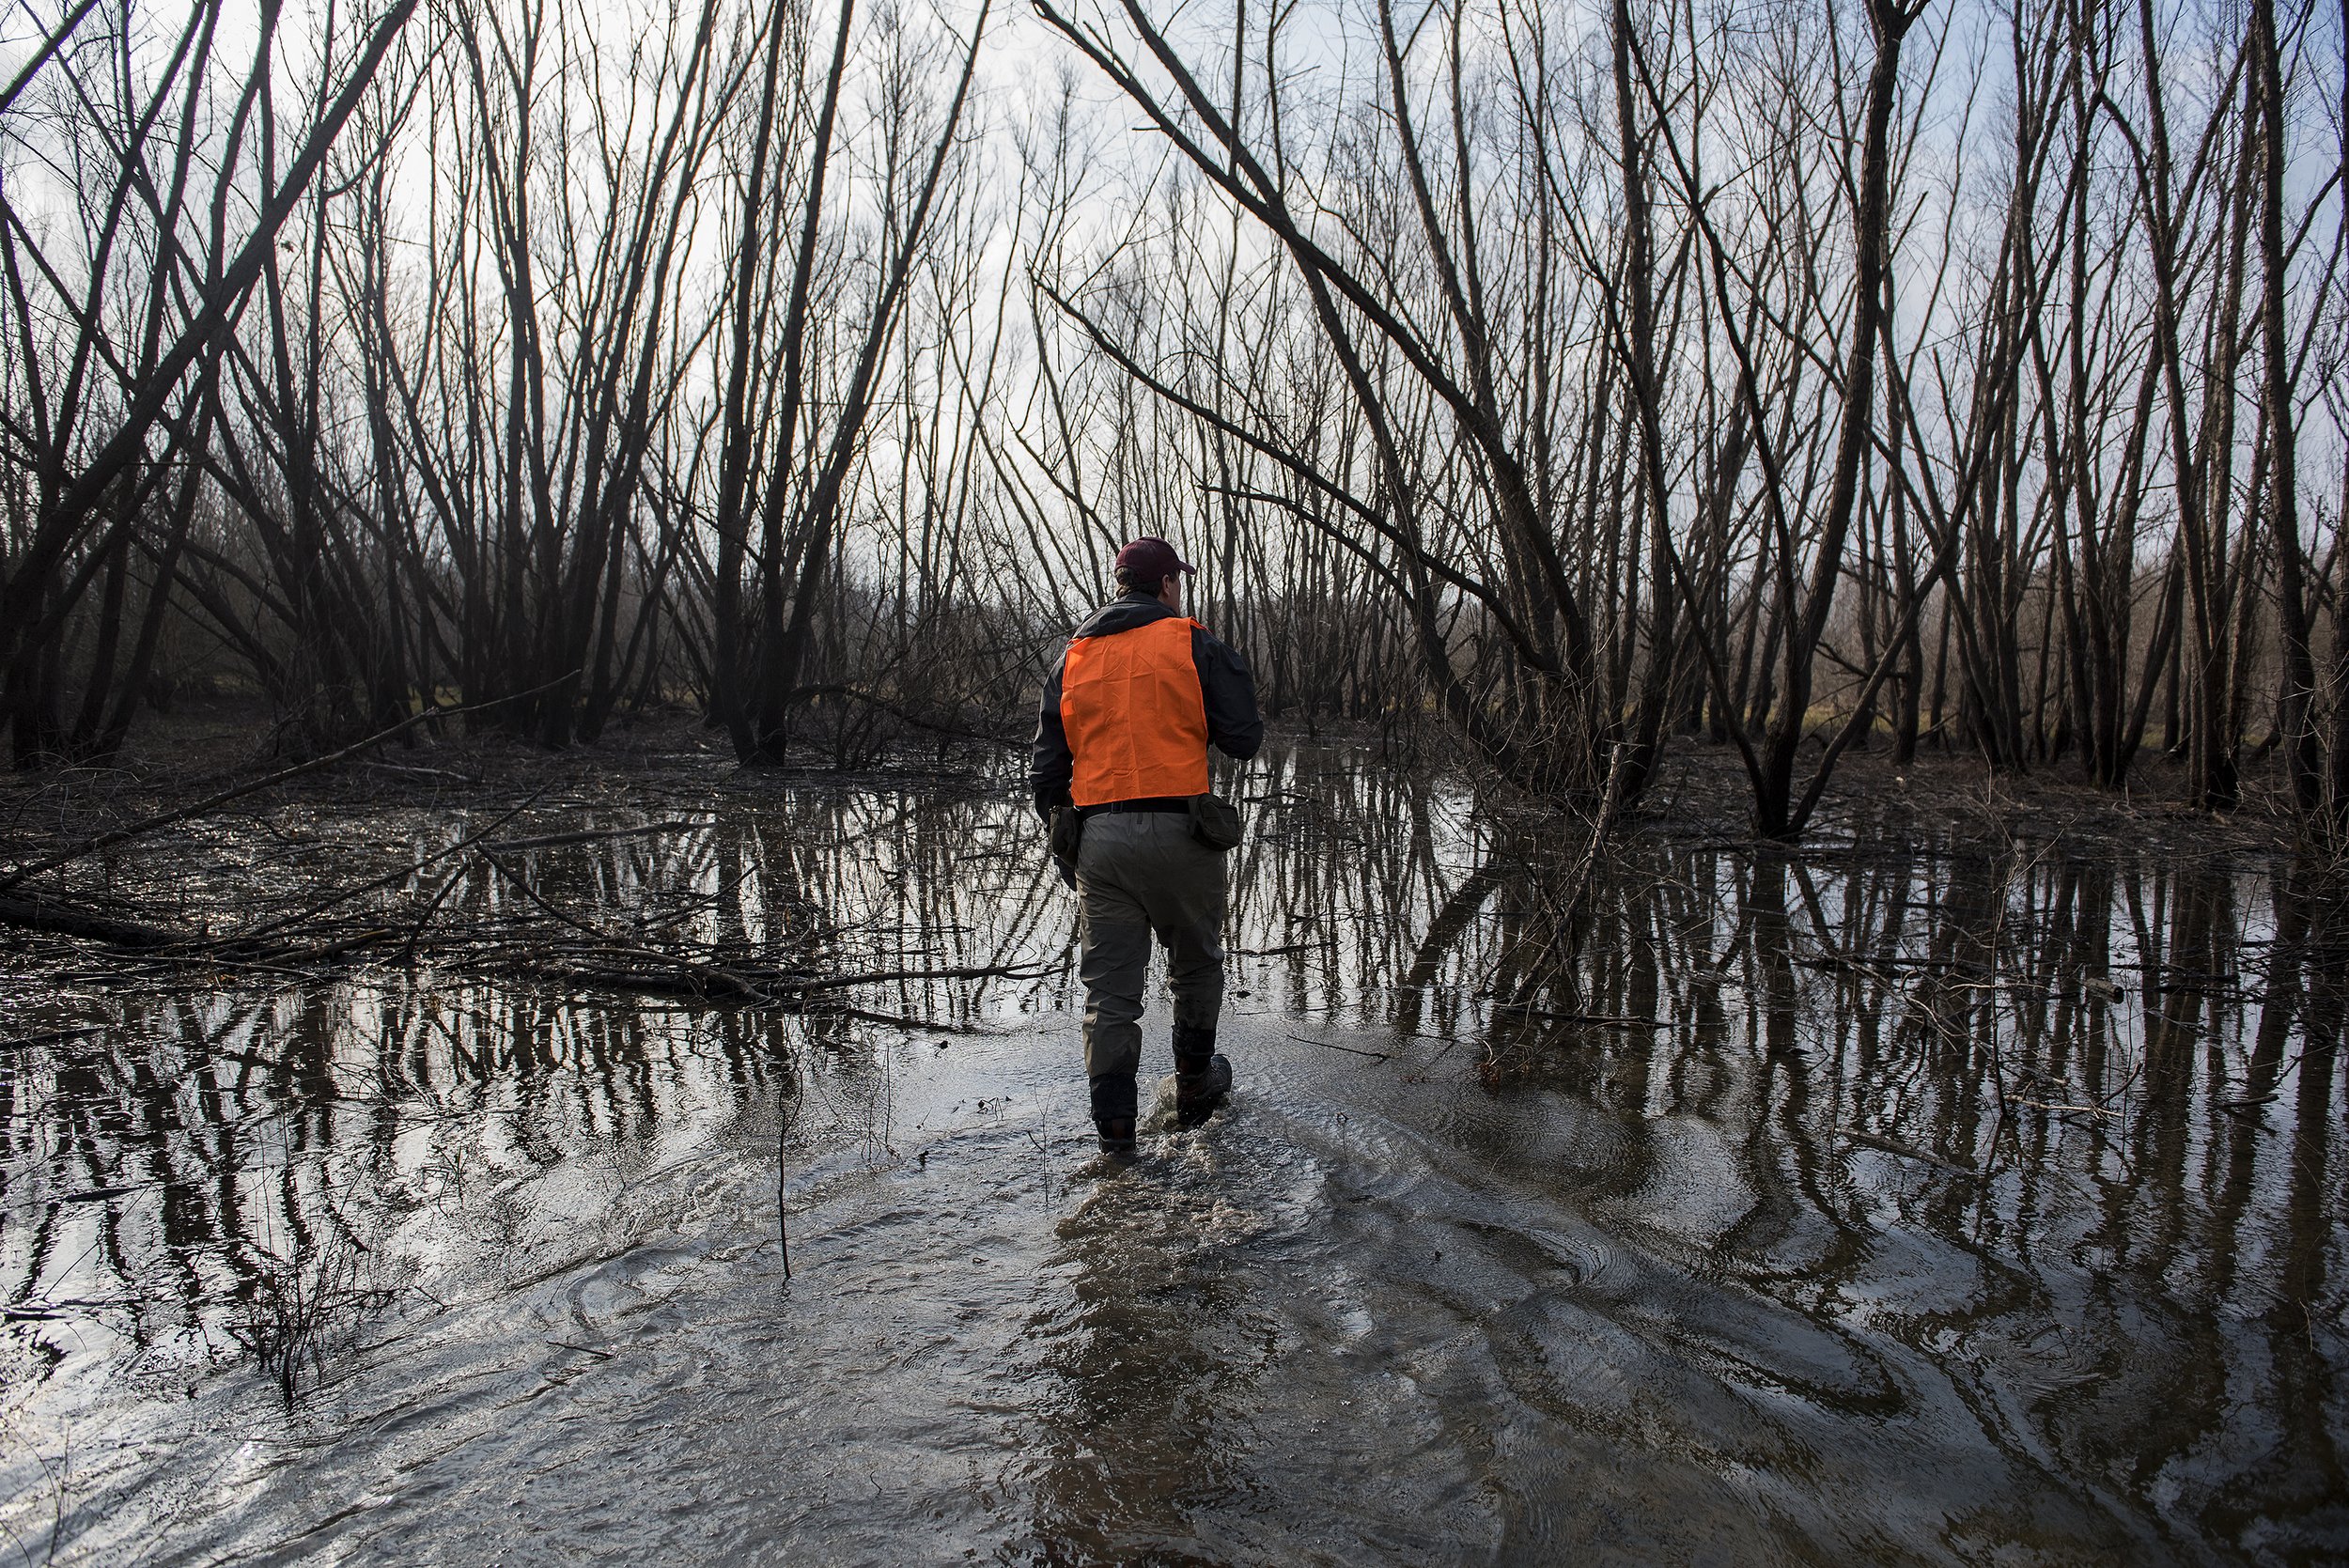  John O'Connell, a Ph.D. candidate in zoology from Miami, traverses wetlands Feb. 12 off Illinois Route 3 near Gale, Illinois. The Cooperative Wildlife Research Laboratory, through which O'Connell conducts his wetland research, could be at risk of lo